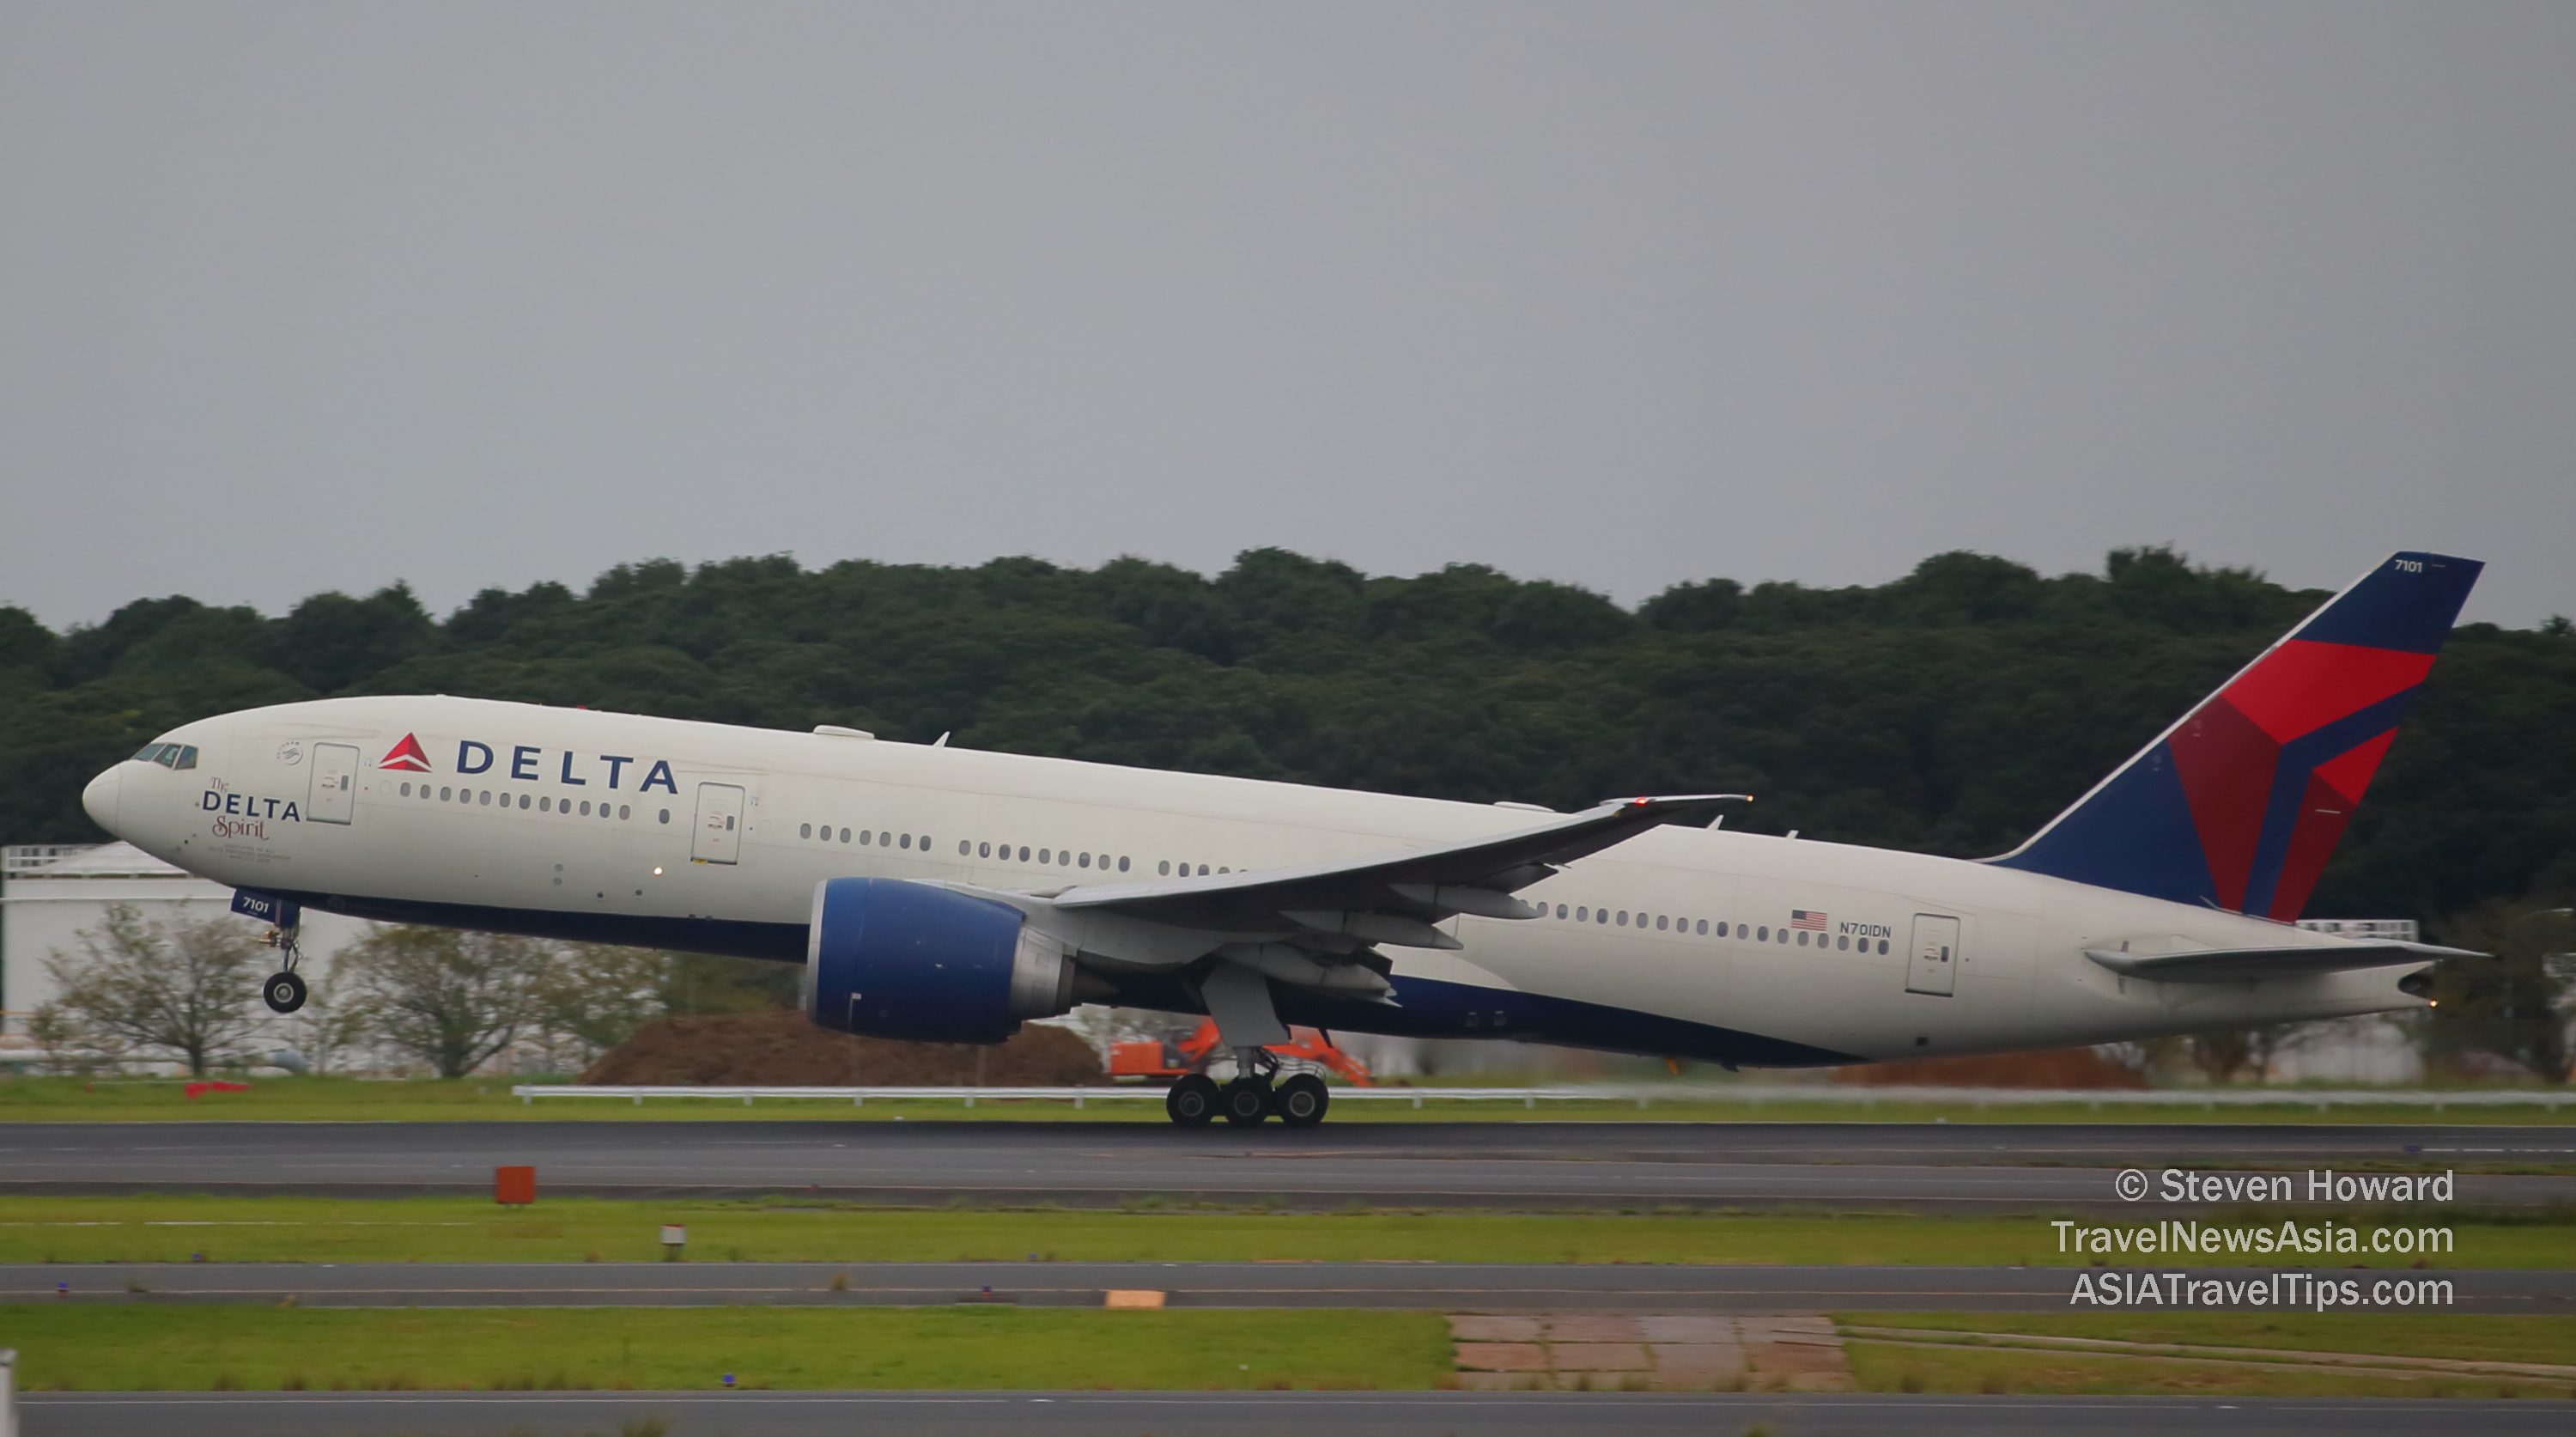 Delta Boeing 777 reg: N701DN. Picture by Steven Howard of TravelNewsAsia.com Click to enlarge.